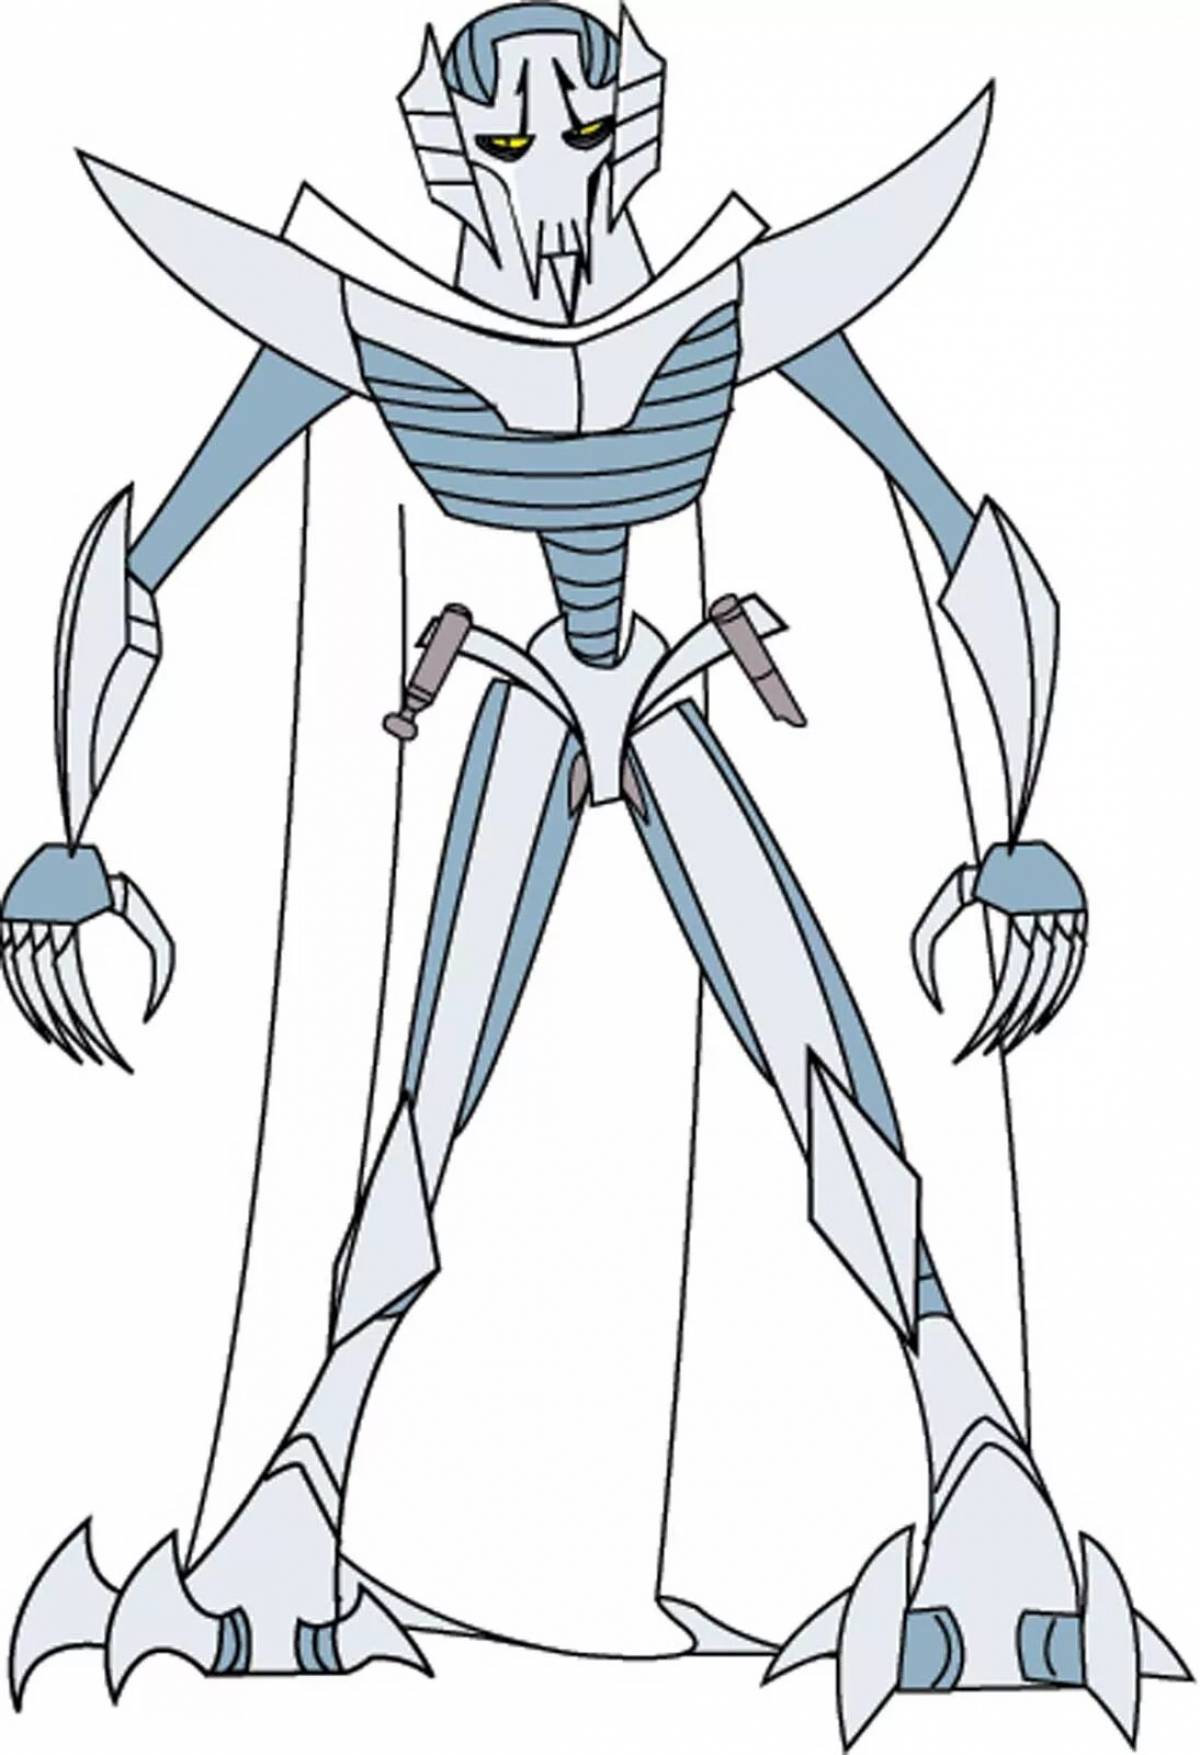 Charming general grievous coloring page